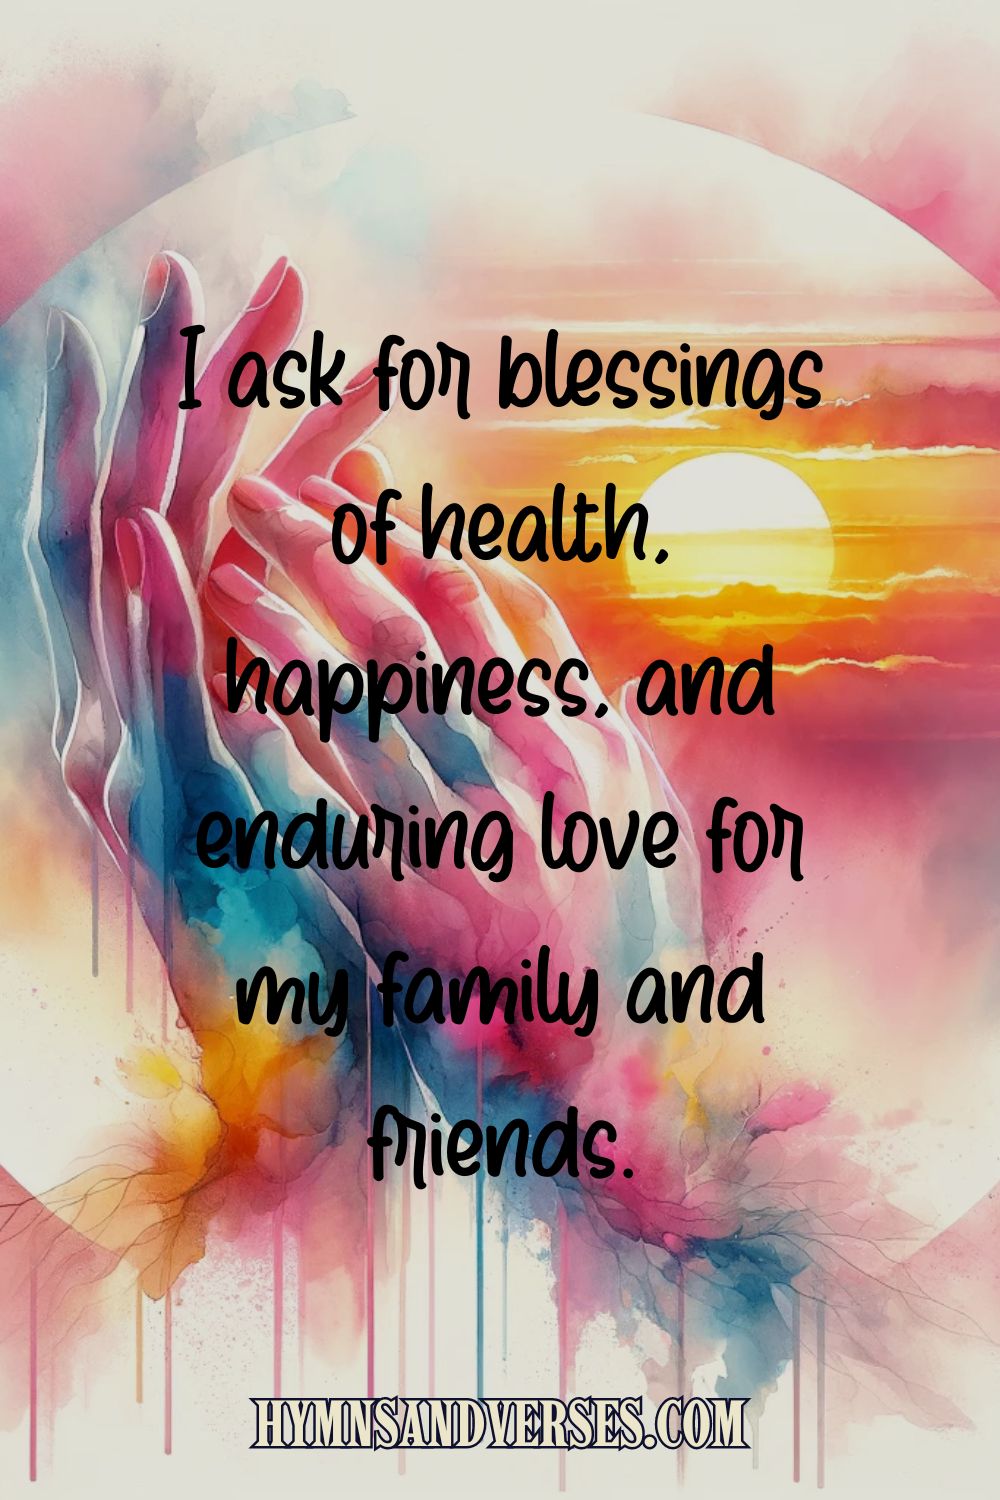 Quote image for post features words: I ask for blessings of health, happiness, and enduring love for my family and friends. 